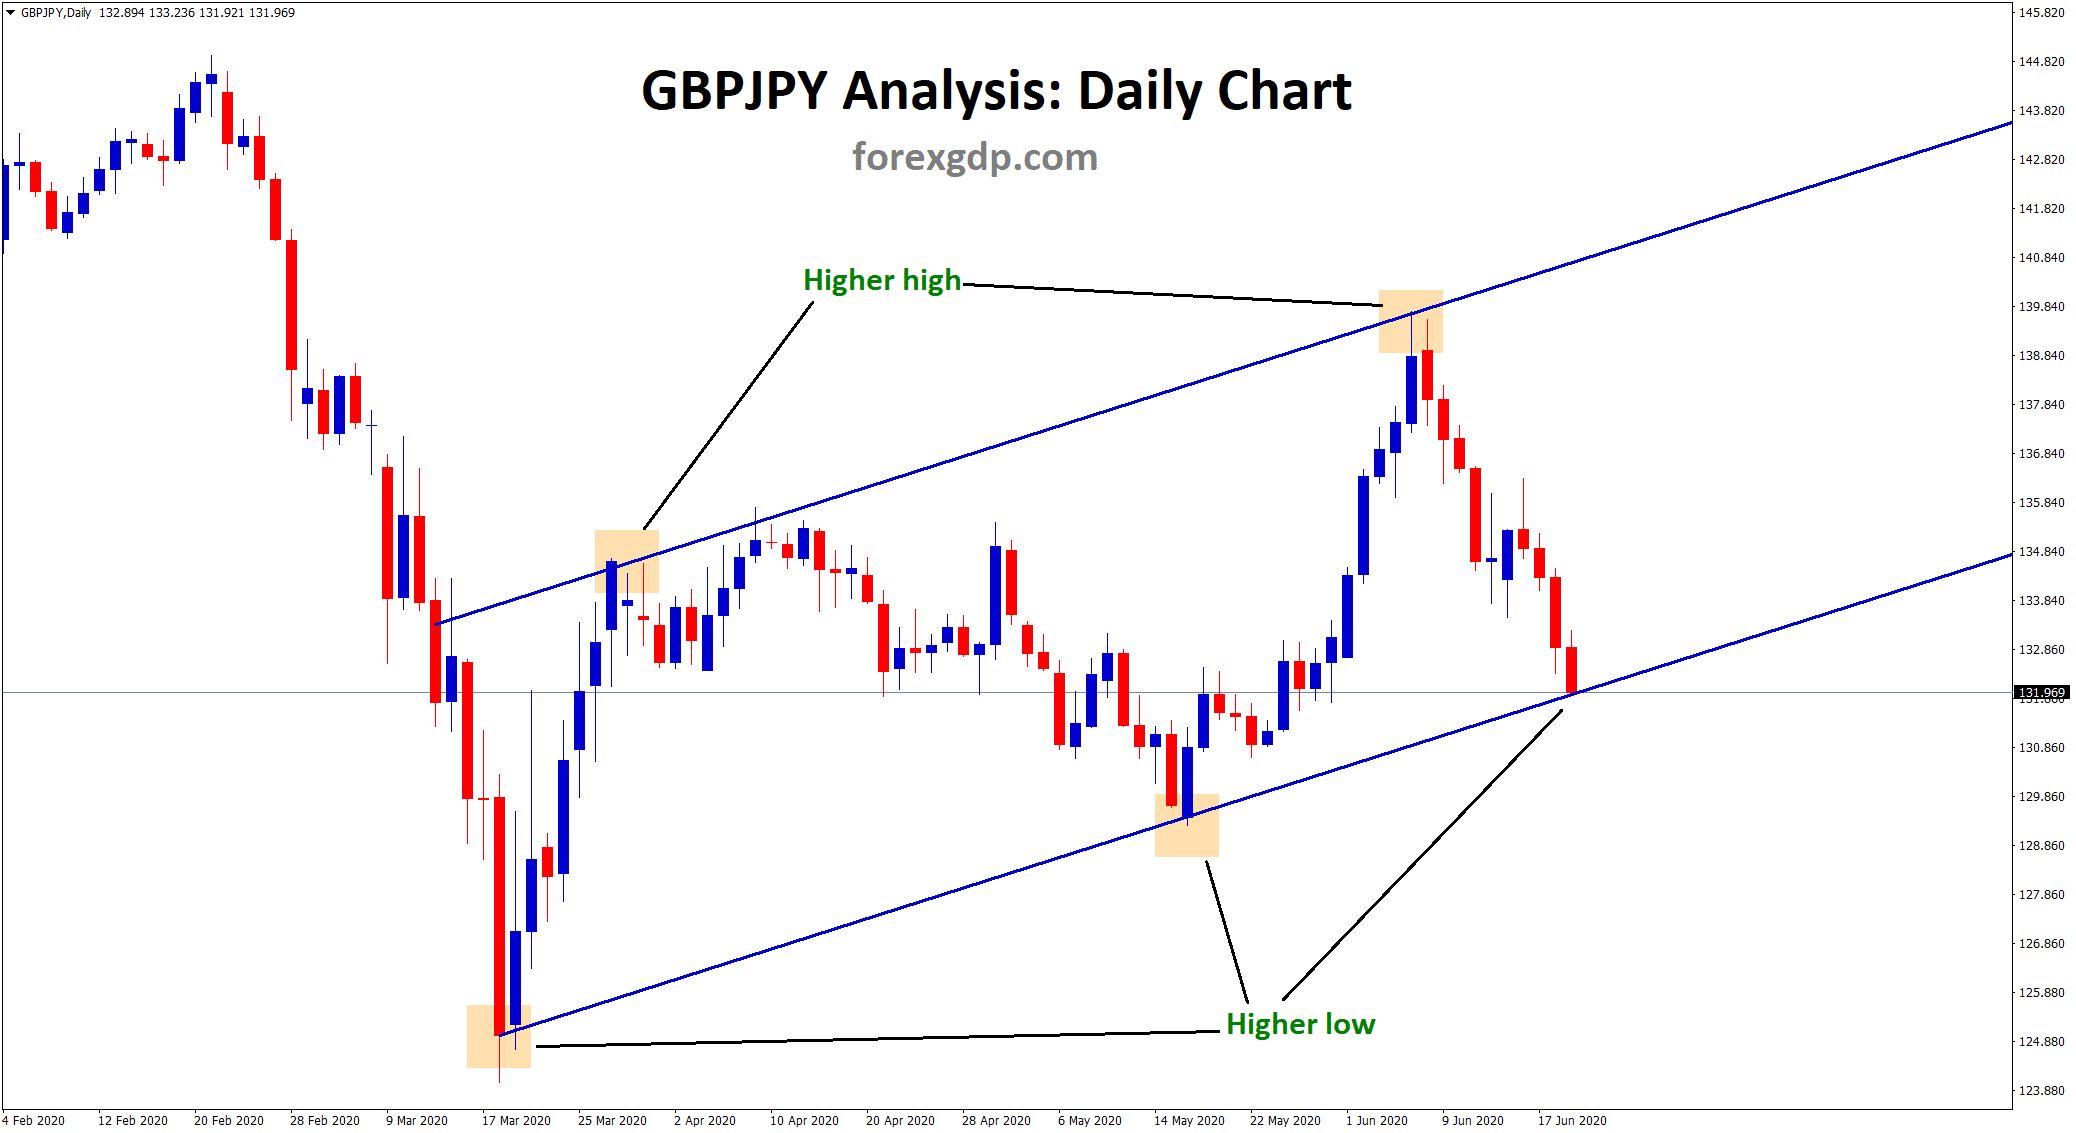 GBPJPY reached the bottom zone of the Up Trendline